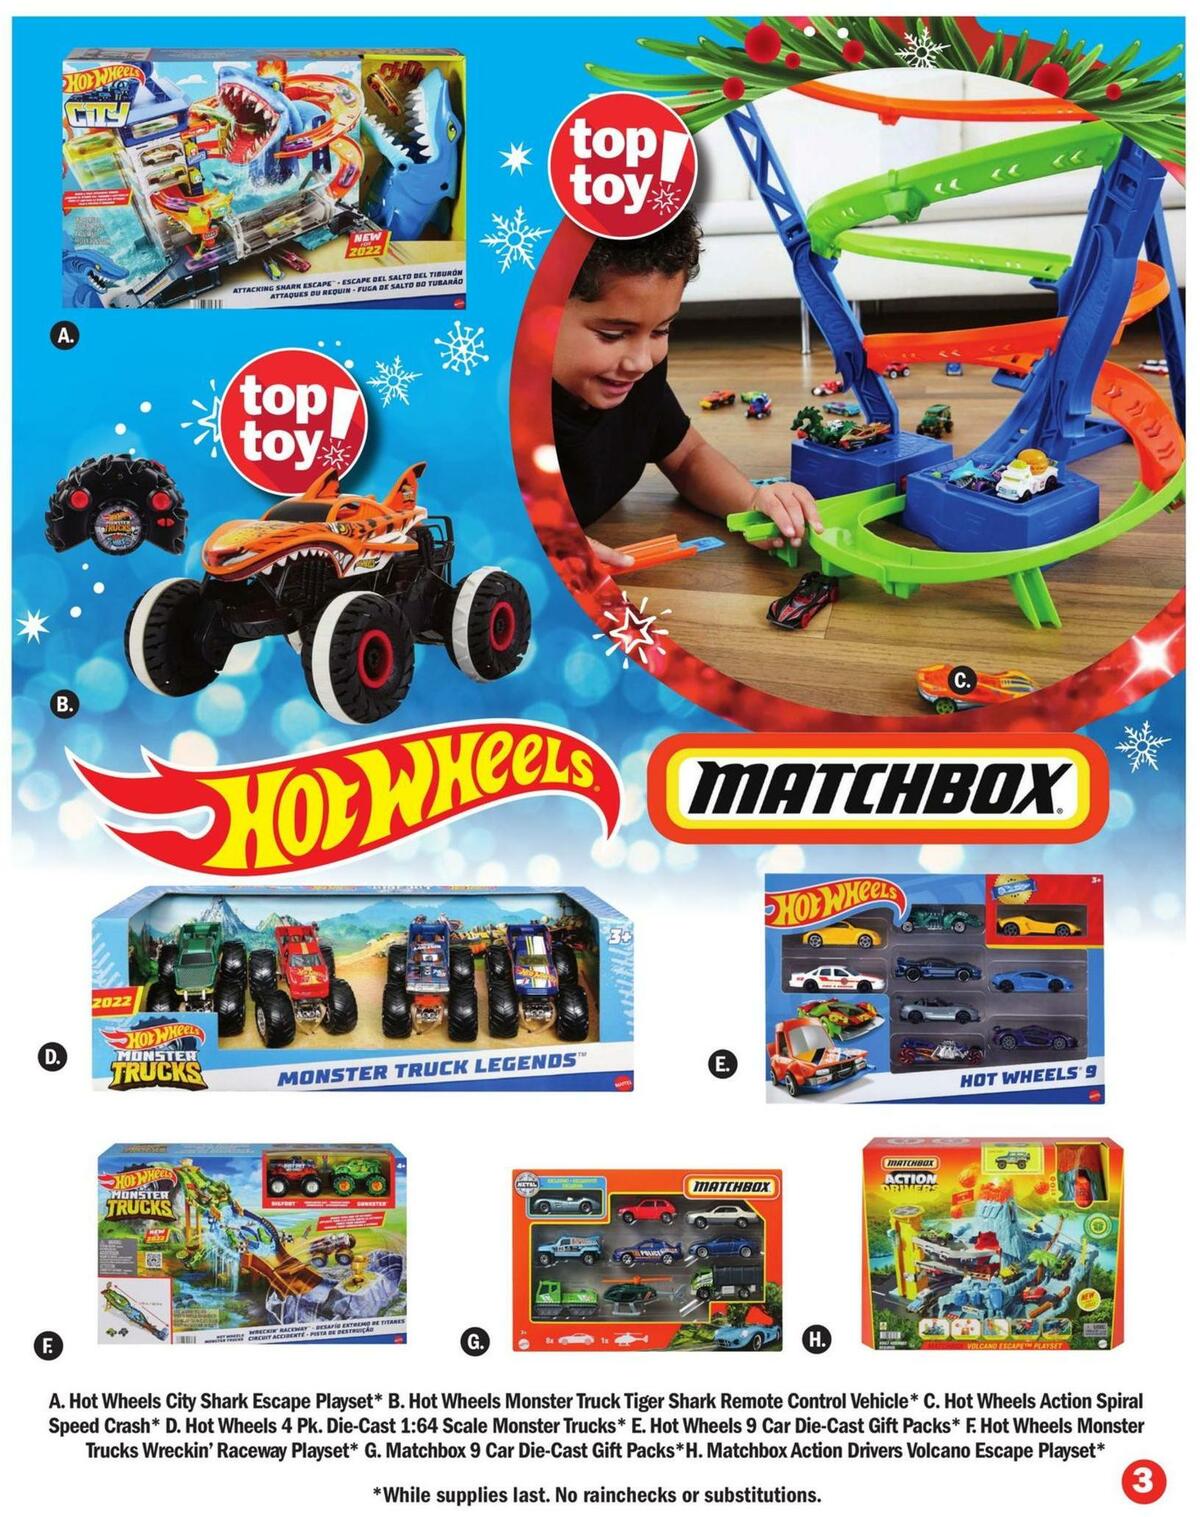 Meijer Holiday Toy Book Weekly Ad from October 30